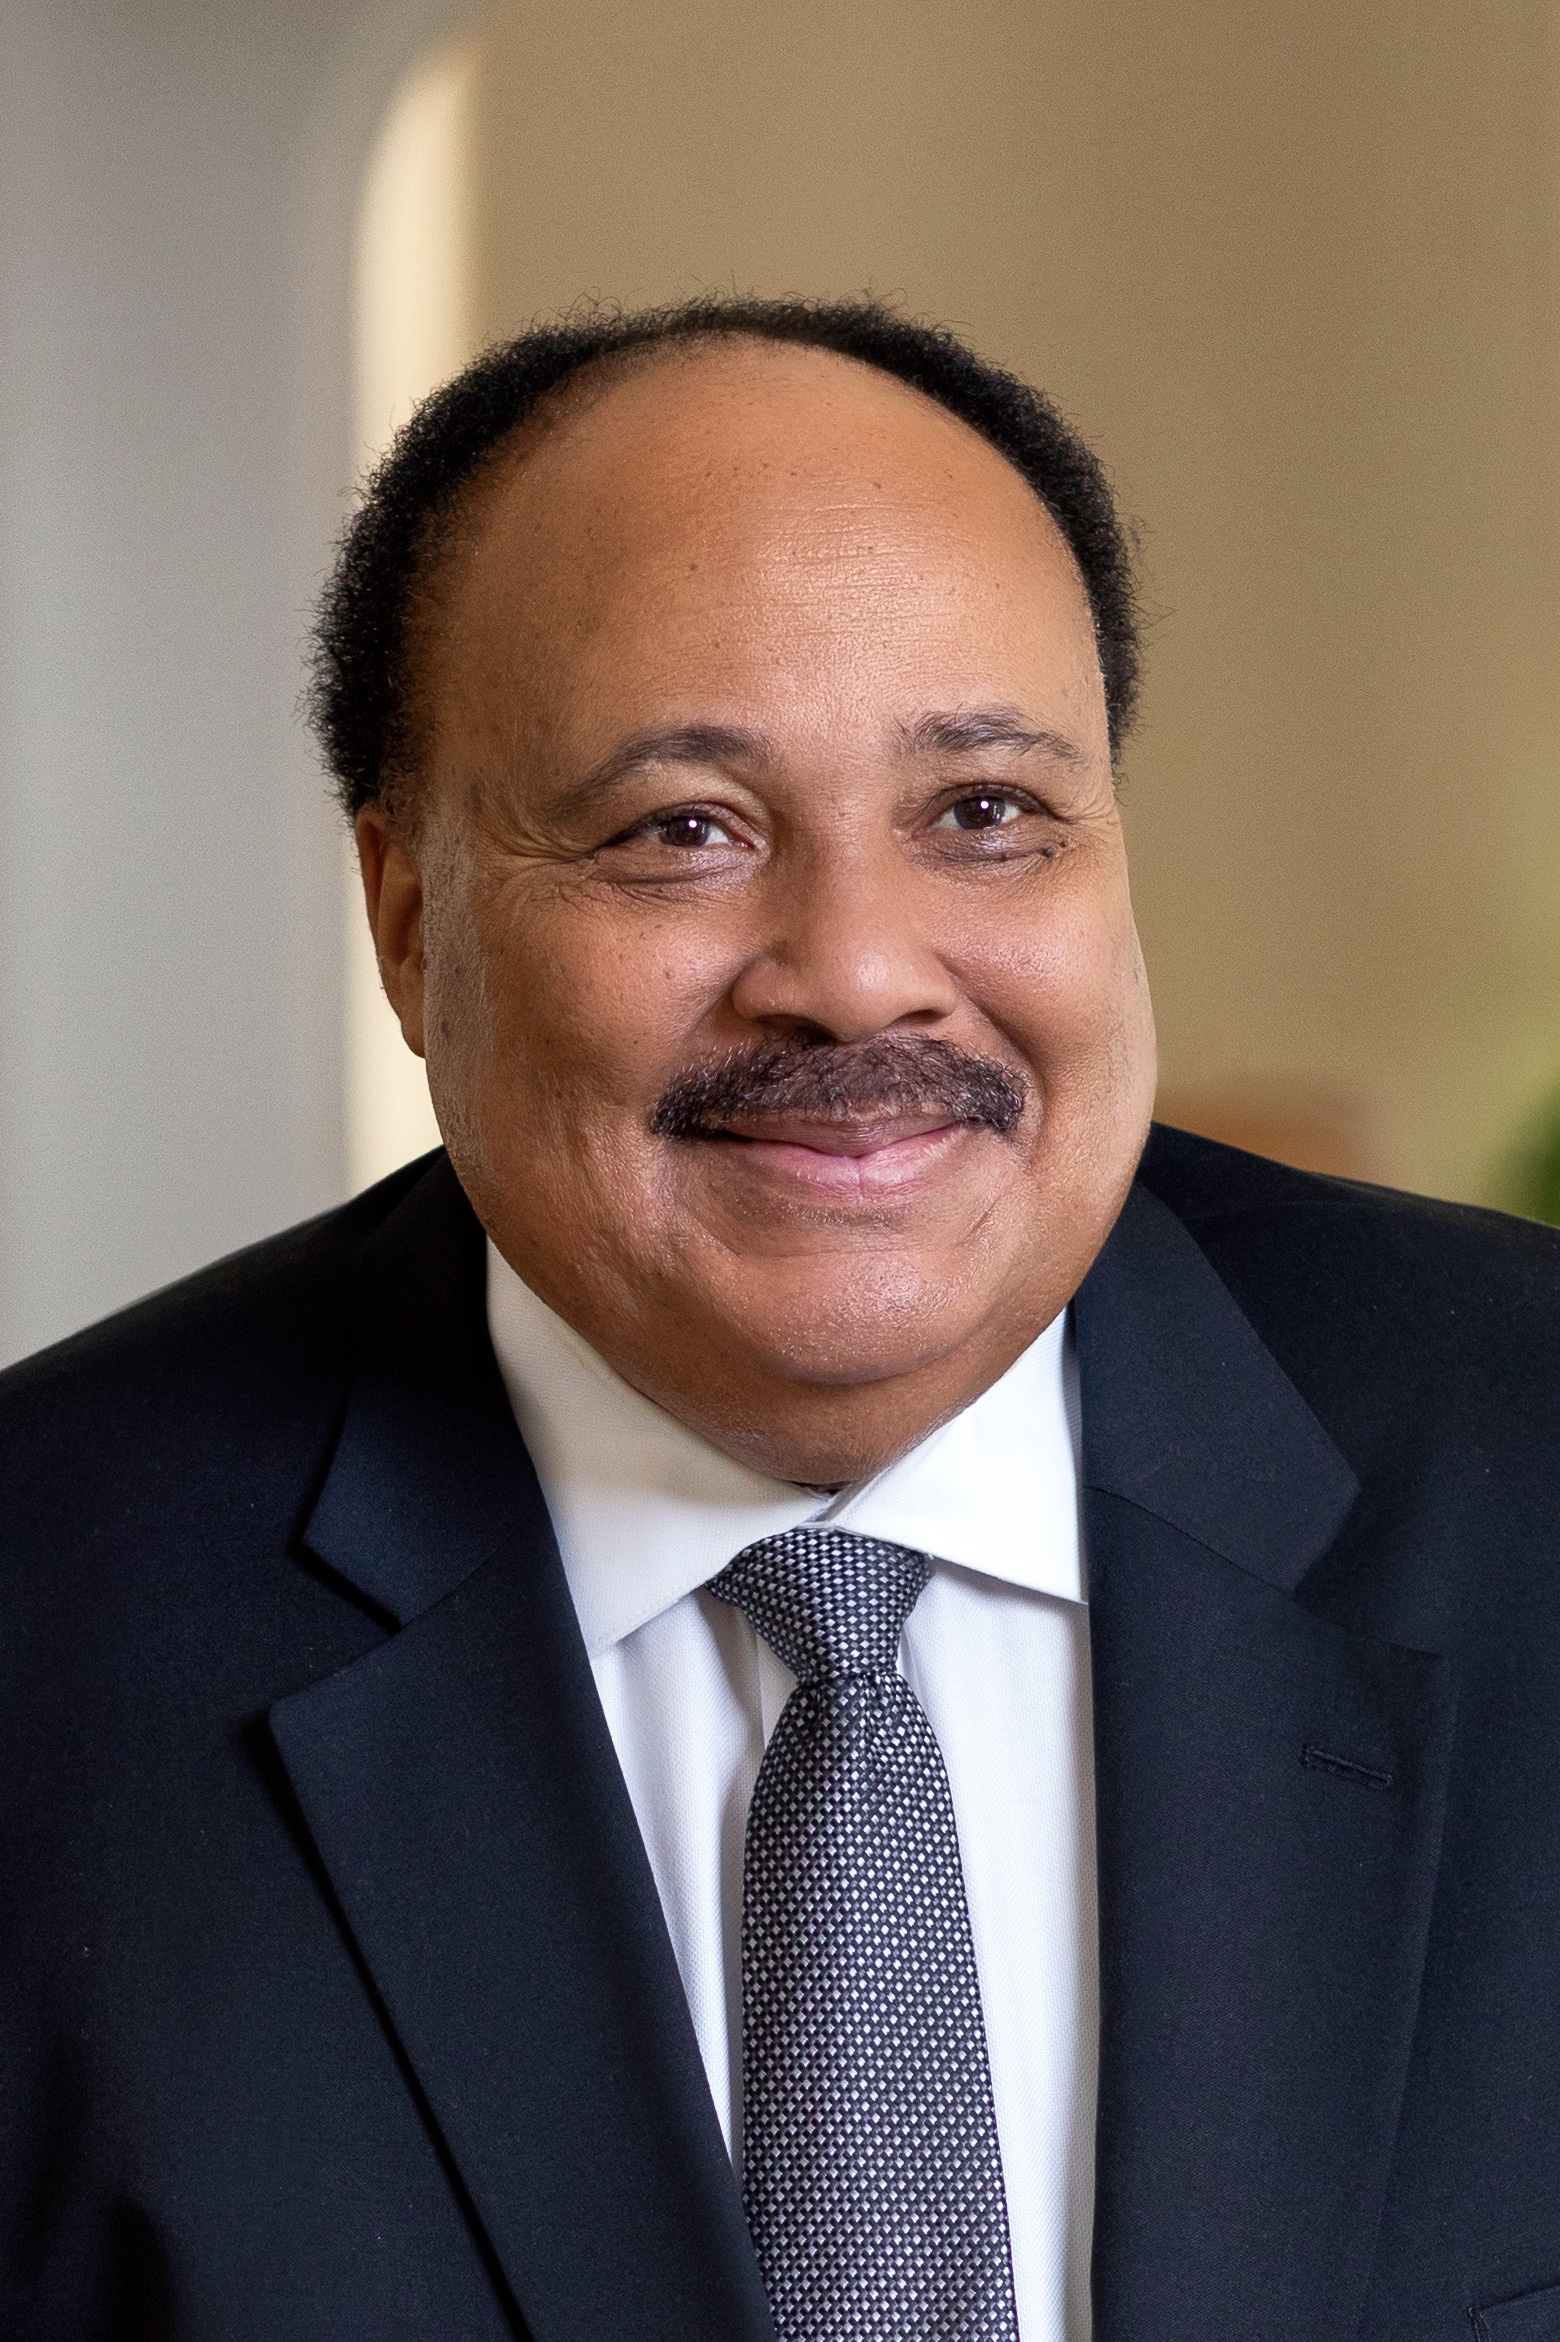 martin luther king iii biography